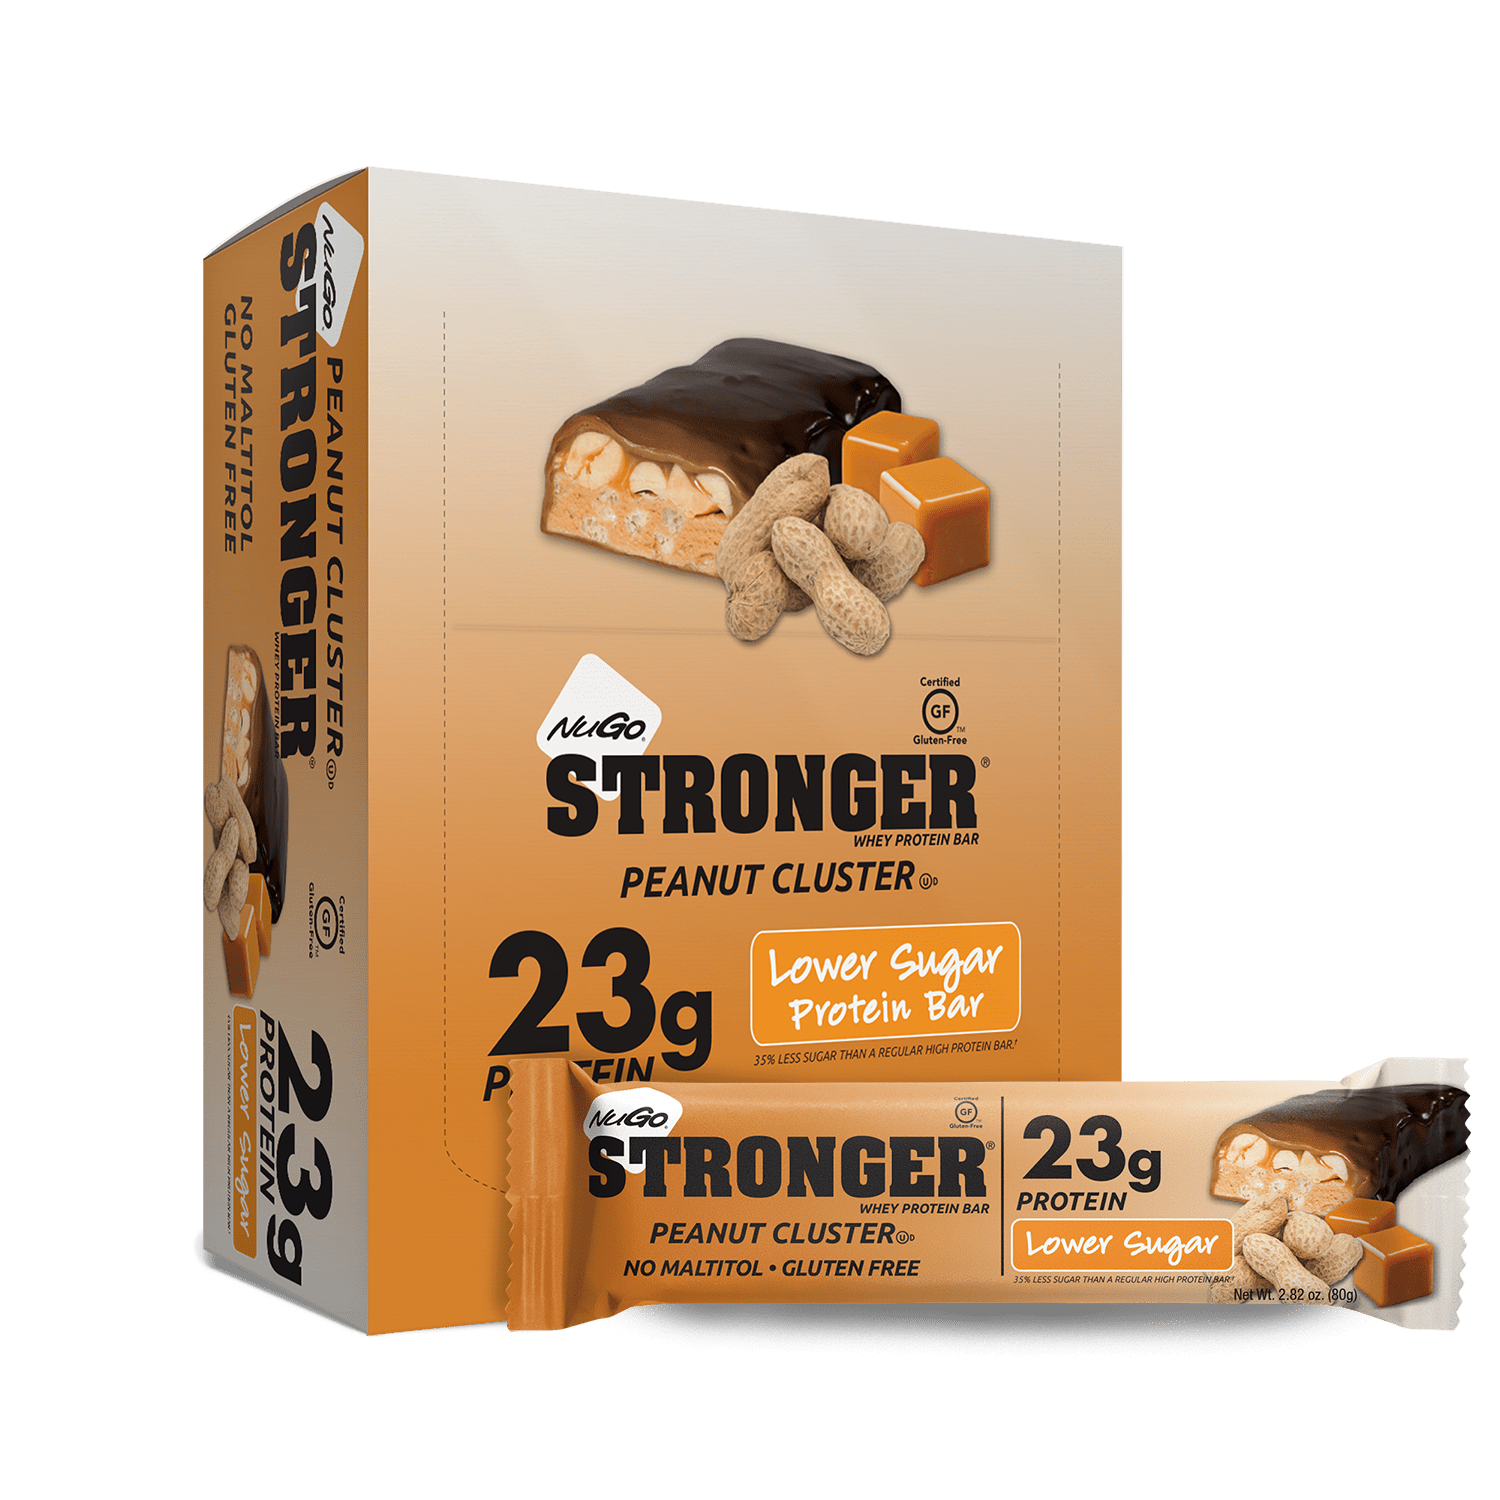 NuGo Stronger Peanut Cluster Bar and Box